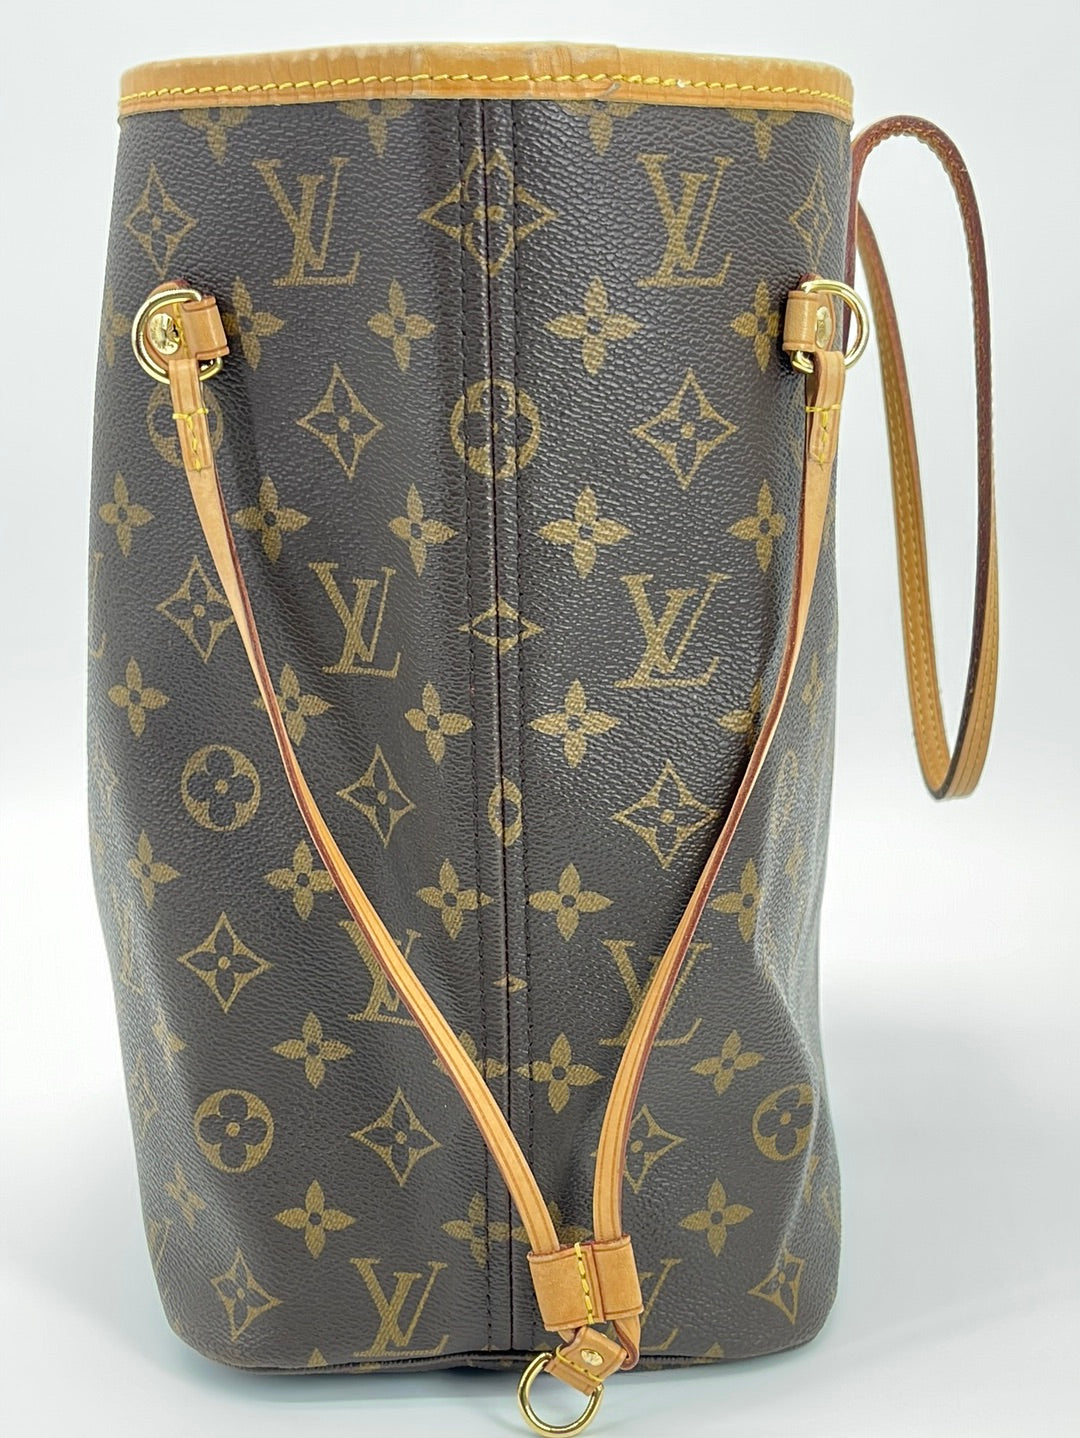 LOUIS VUITTON Neverfull MM M41177 Tote Bag Brown Monogram Canvas & Red  Unused